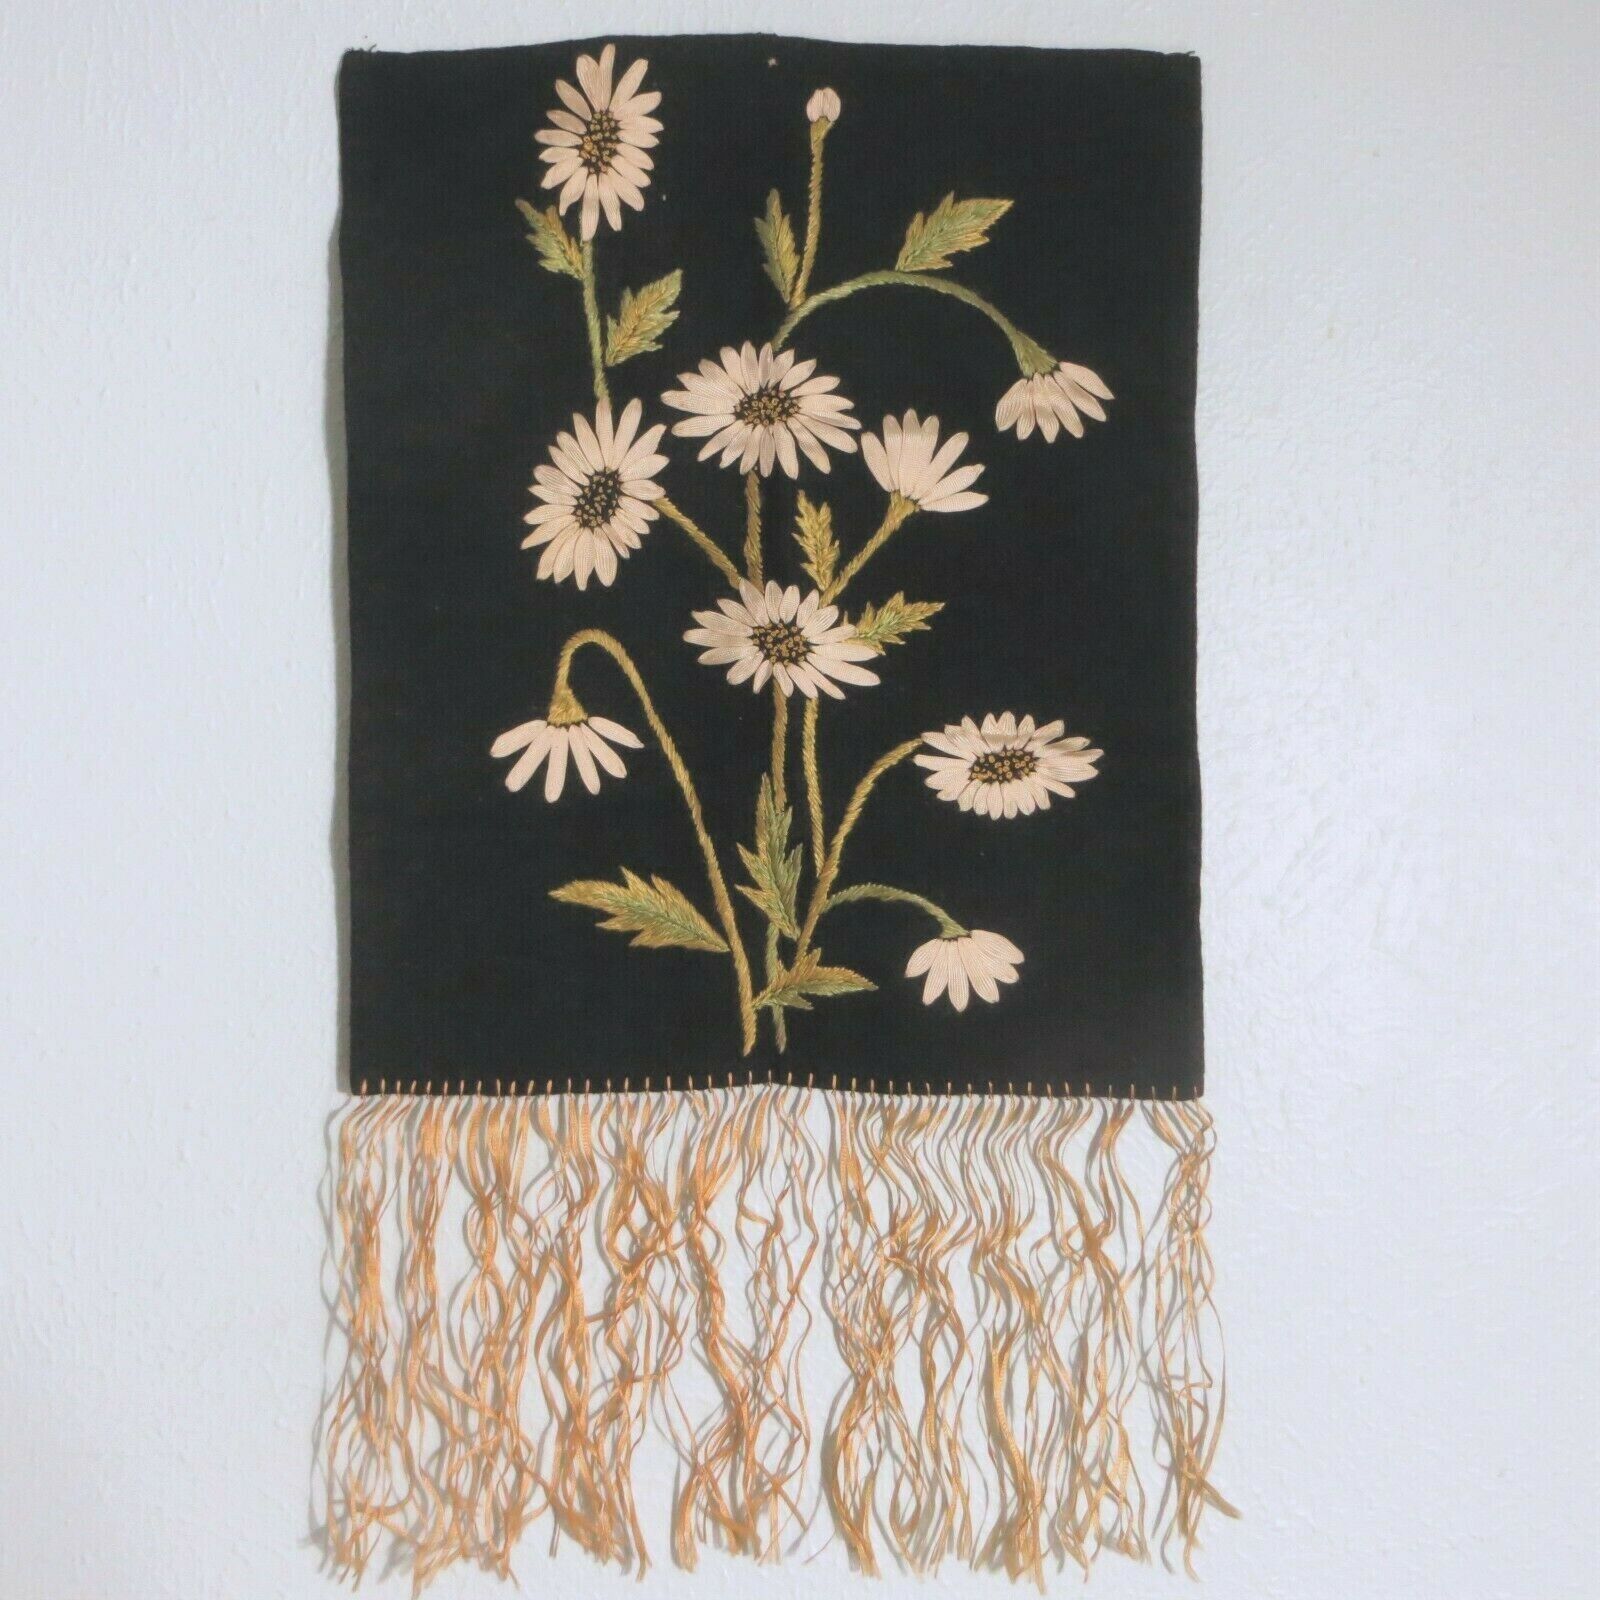 Antique Floral Wall Hanging Ribbonwork Embroidery Ribbon Daisy Flowers